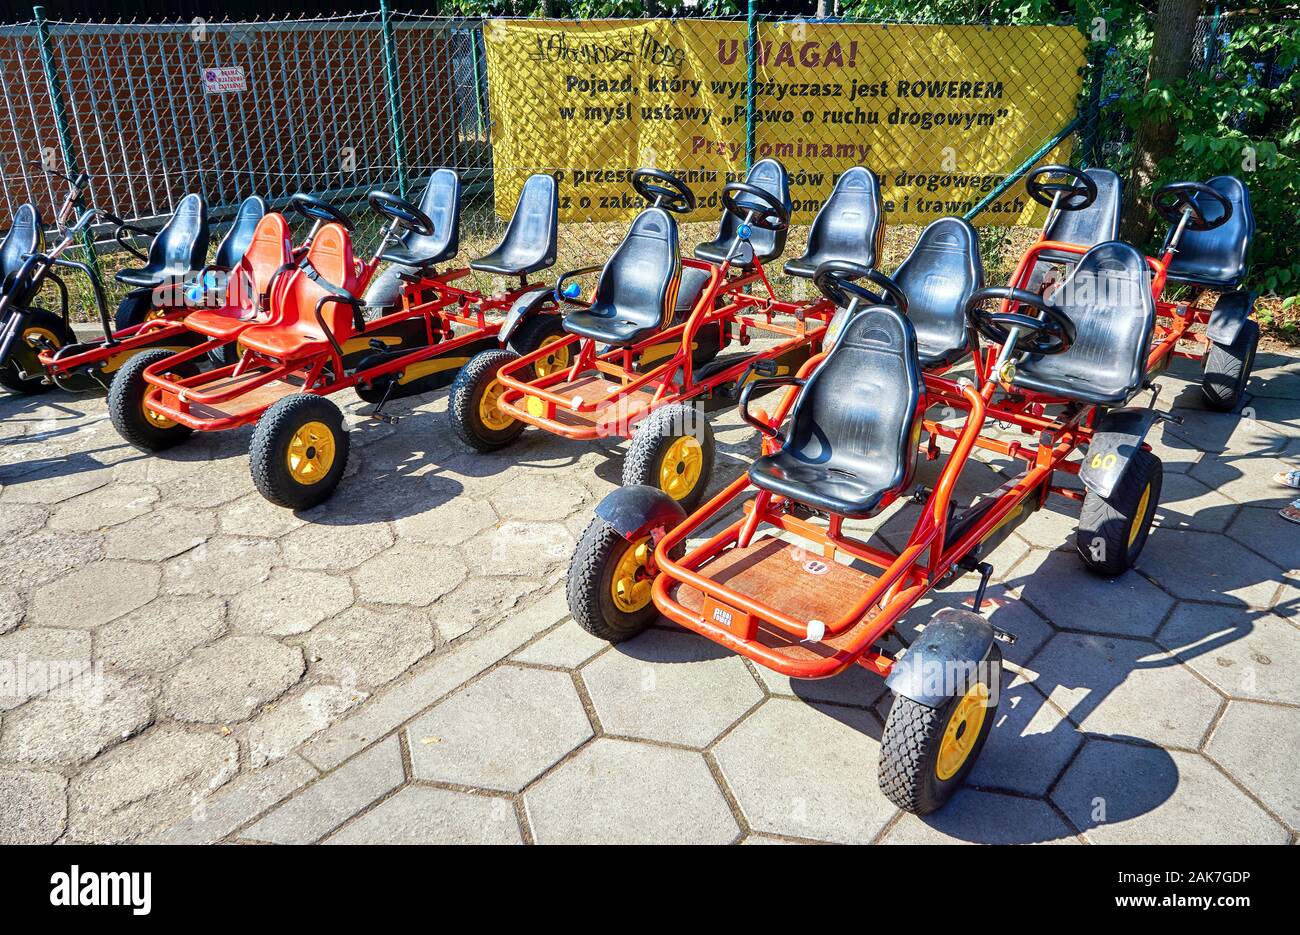 Small pedal go-kart rental cars for children in a row ready for use. Stock Photo